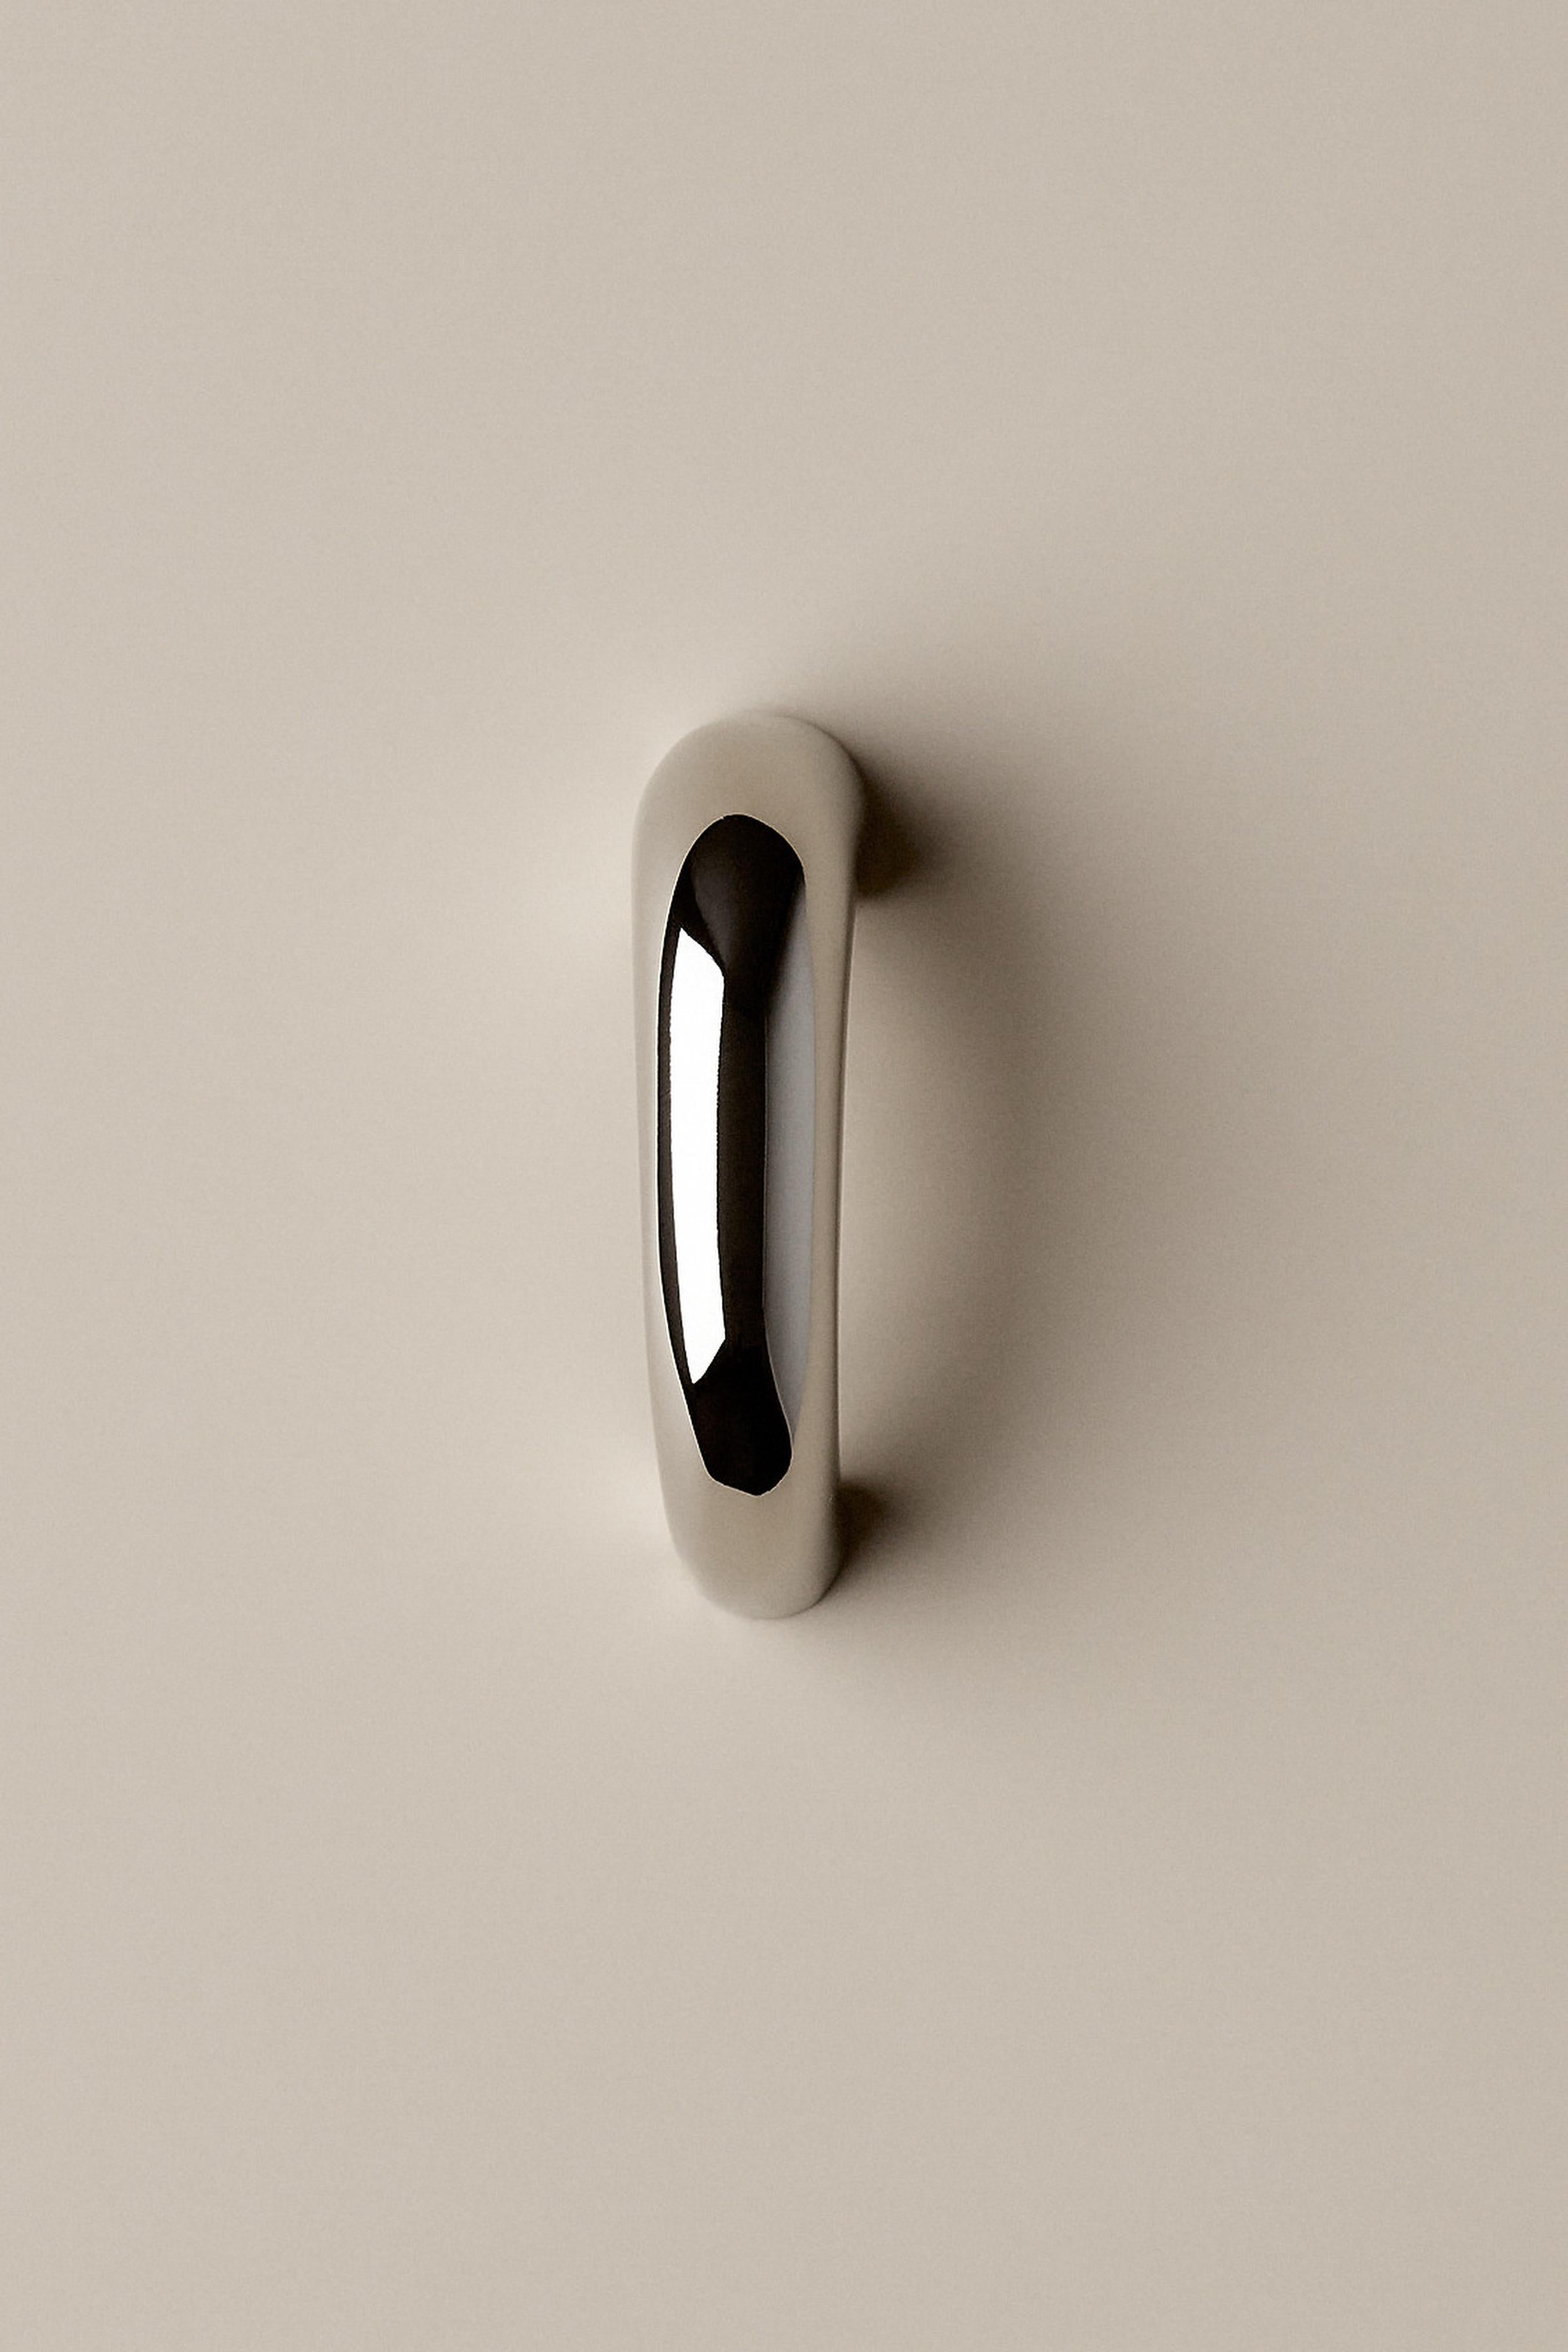 Contemporary Door Handle / Knob 'Burly' by Spaces Within, Dark Brass For Sale 6